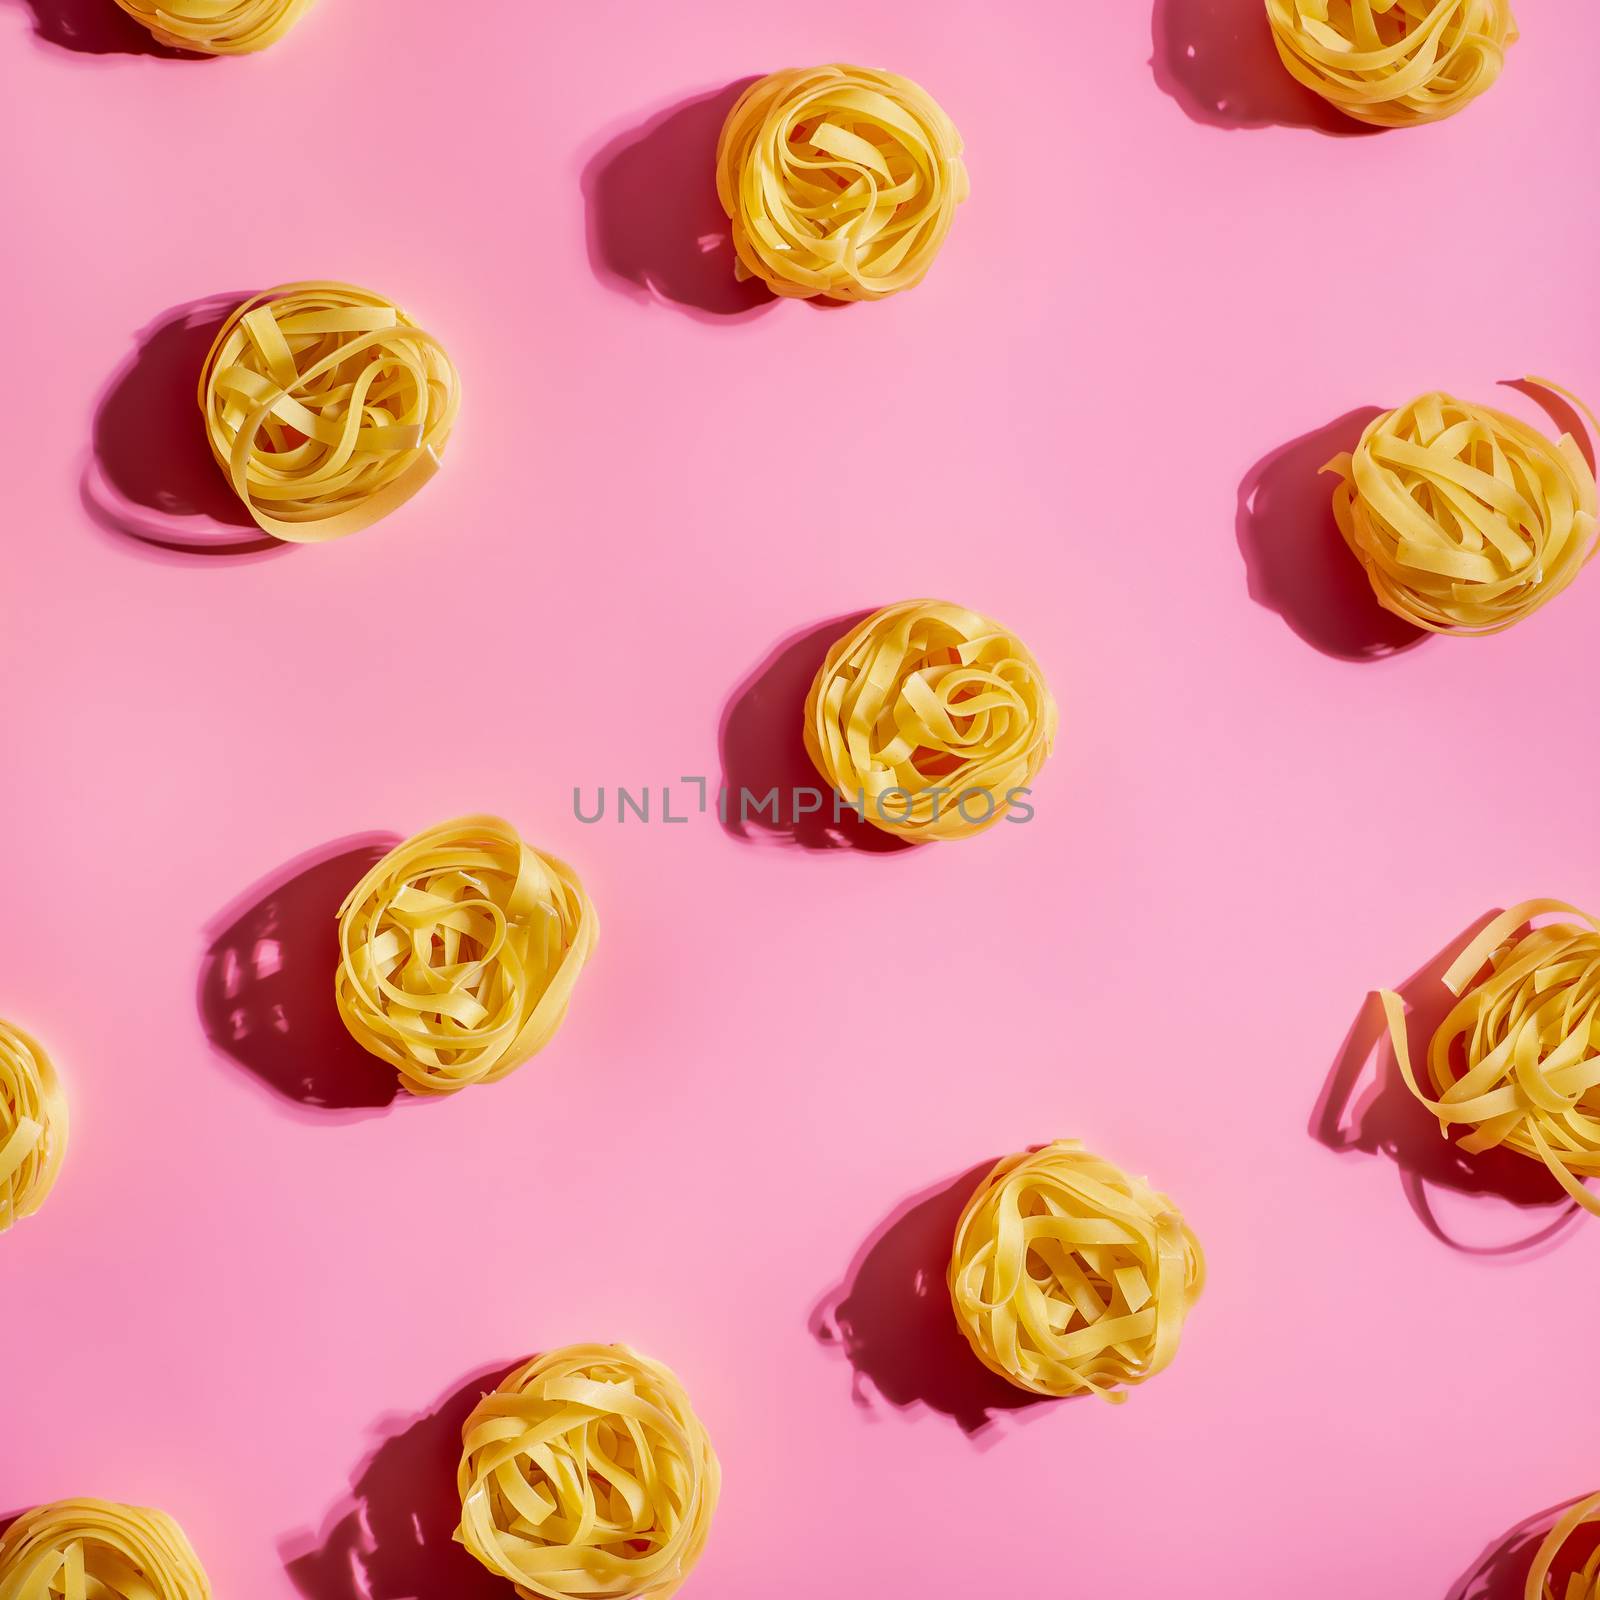 Pasta art. Tagliatelle on pink background in hard light. Creative layout with pasta noodles, top view or flat lay. Square crop. Creative design for menu of italian cuisine with copy space